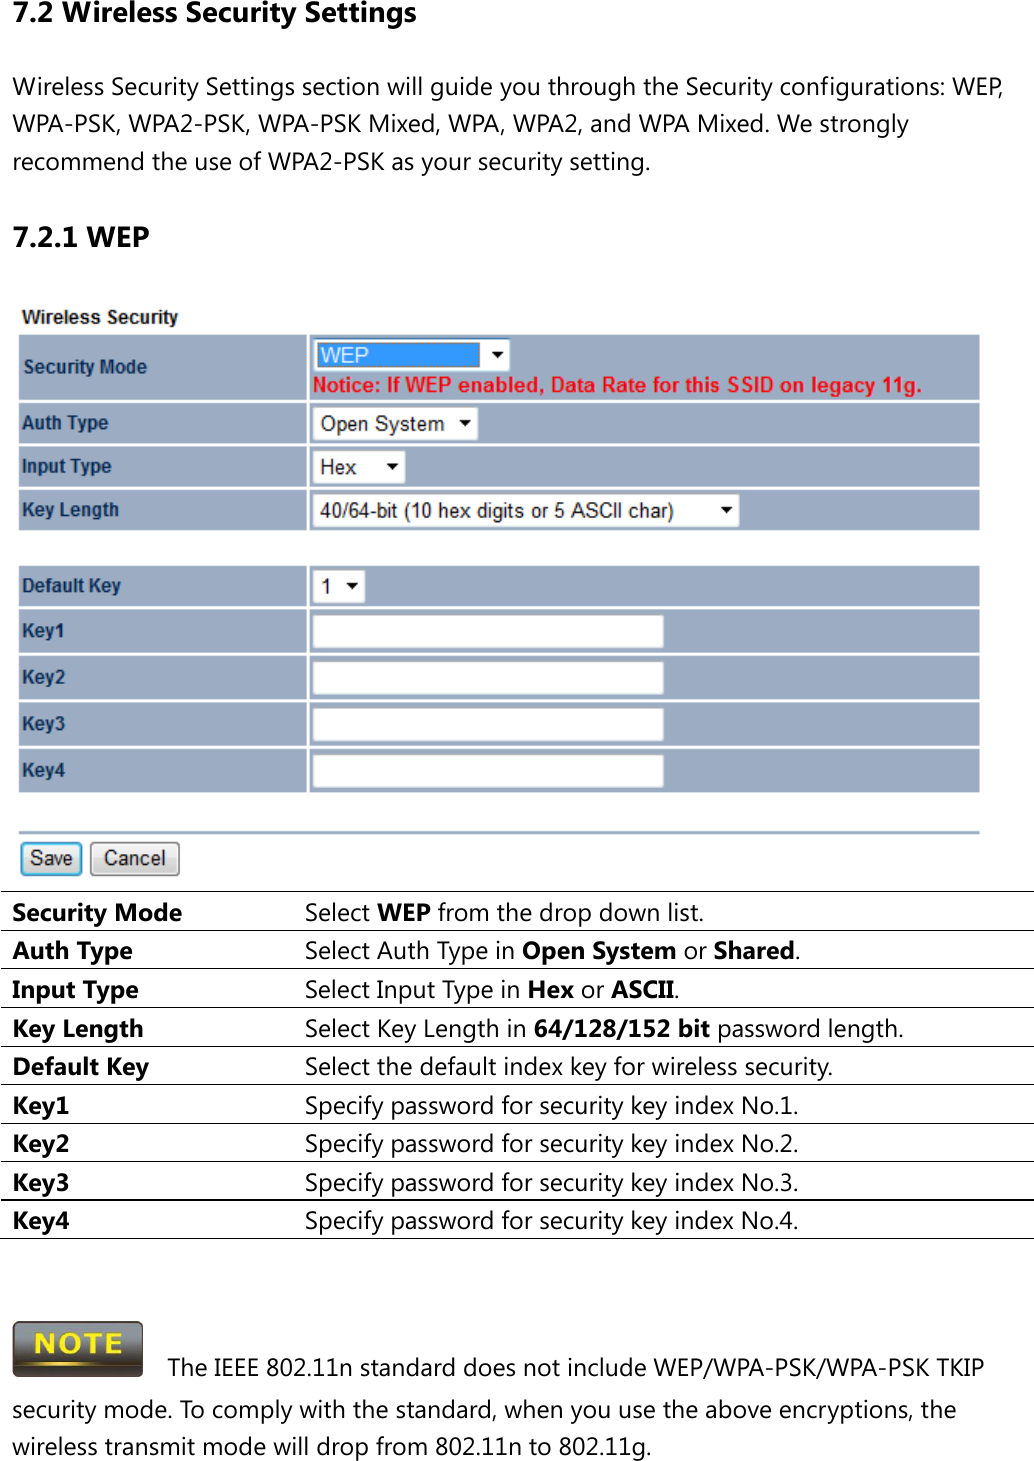 7.2 Wireless Security Settings Wireless Security Settings section will guide you through the Security configurations: WEP, WPA-PSK, WPA2-PSK, WPA-PSK Mixed, WPA, WPA2, and WPA Mixed. We strongly recommend the use of WPA2-PSK as your security setting. 7.2.1 WEP  Security Mode Select WEP from the drop down list. Auth Type Select Auth Type in Open System or Shared. Input Type Select Input Type in Hex or ASCII. Key Length Select Key Length in 64/128/152 bit password length. Default Key Select the default index key for wireless security. Key1 Specify password for security key index No.1. Key2 Specify password for security key index No.2. Key3 Specify password for security key index No.3. Key4 Specify password for security key index No.4.     The IEEE 802.11n standard does not include WEP/WPA-PSK/WPA-PSK TKIP security mode. To comply with the standard, when you use the above encryptions, the wireless transmit mode will drop from 802.11n to 802.11g.    